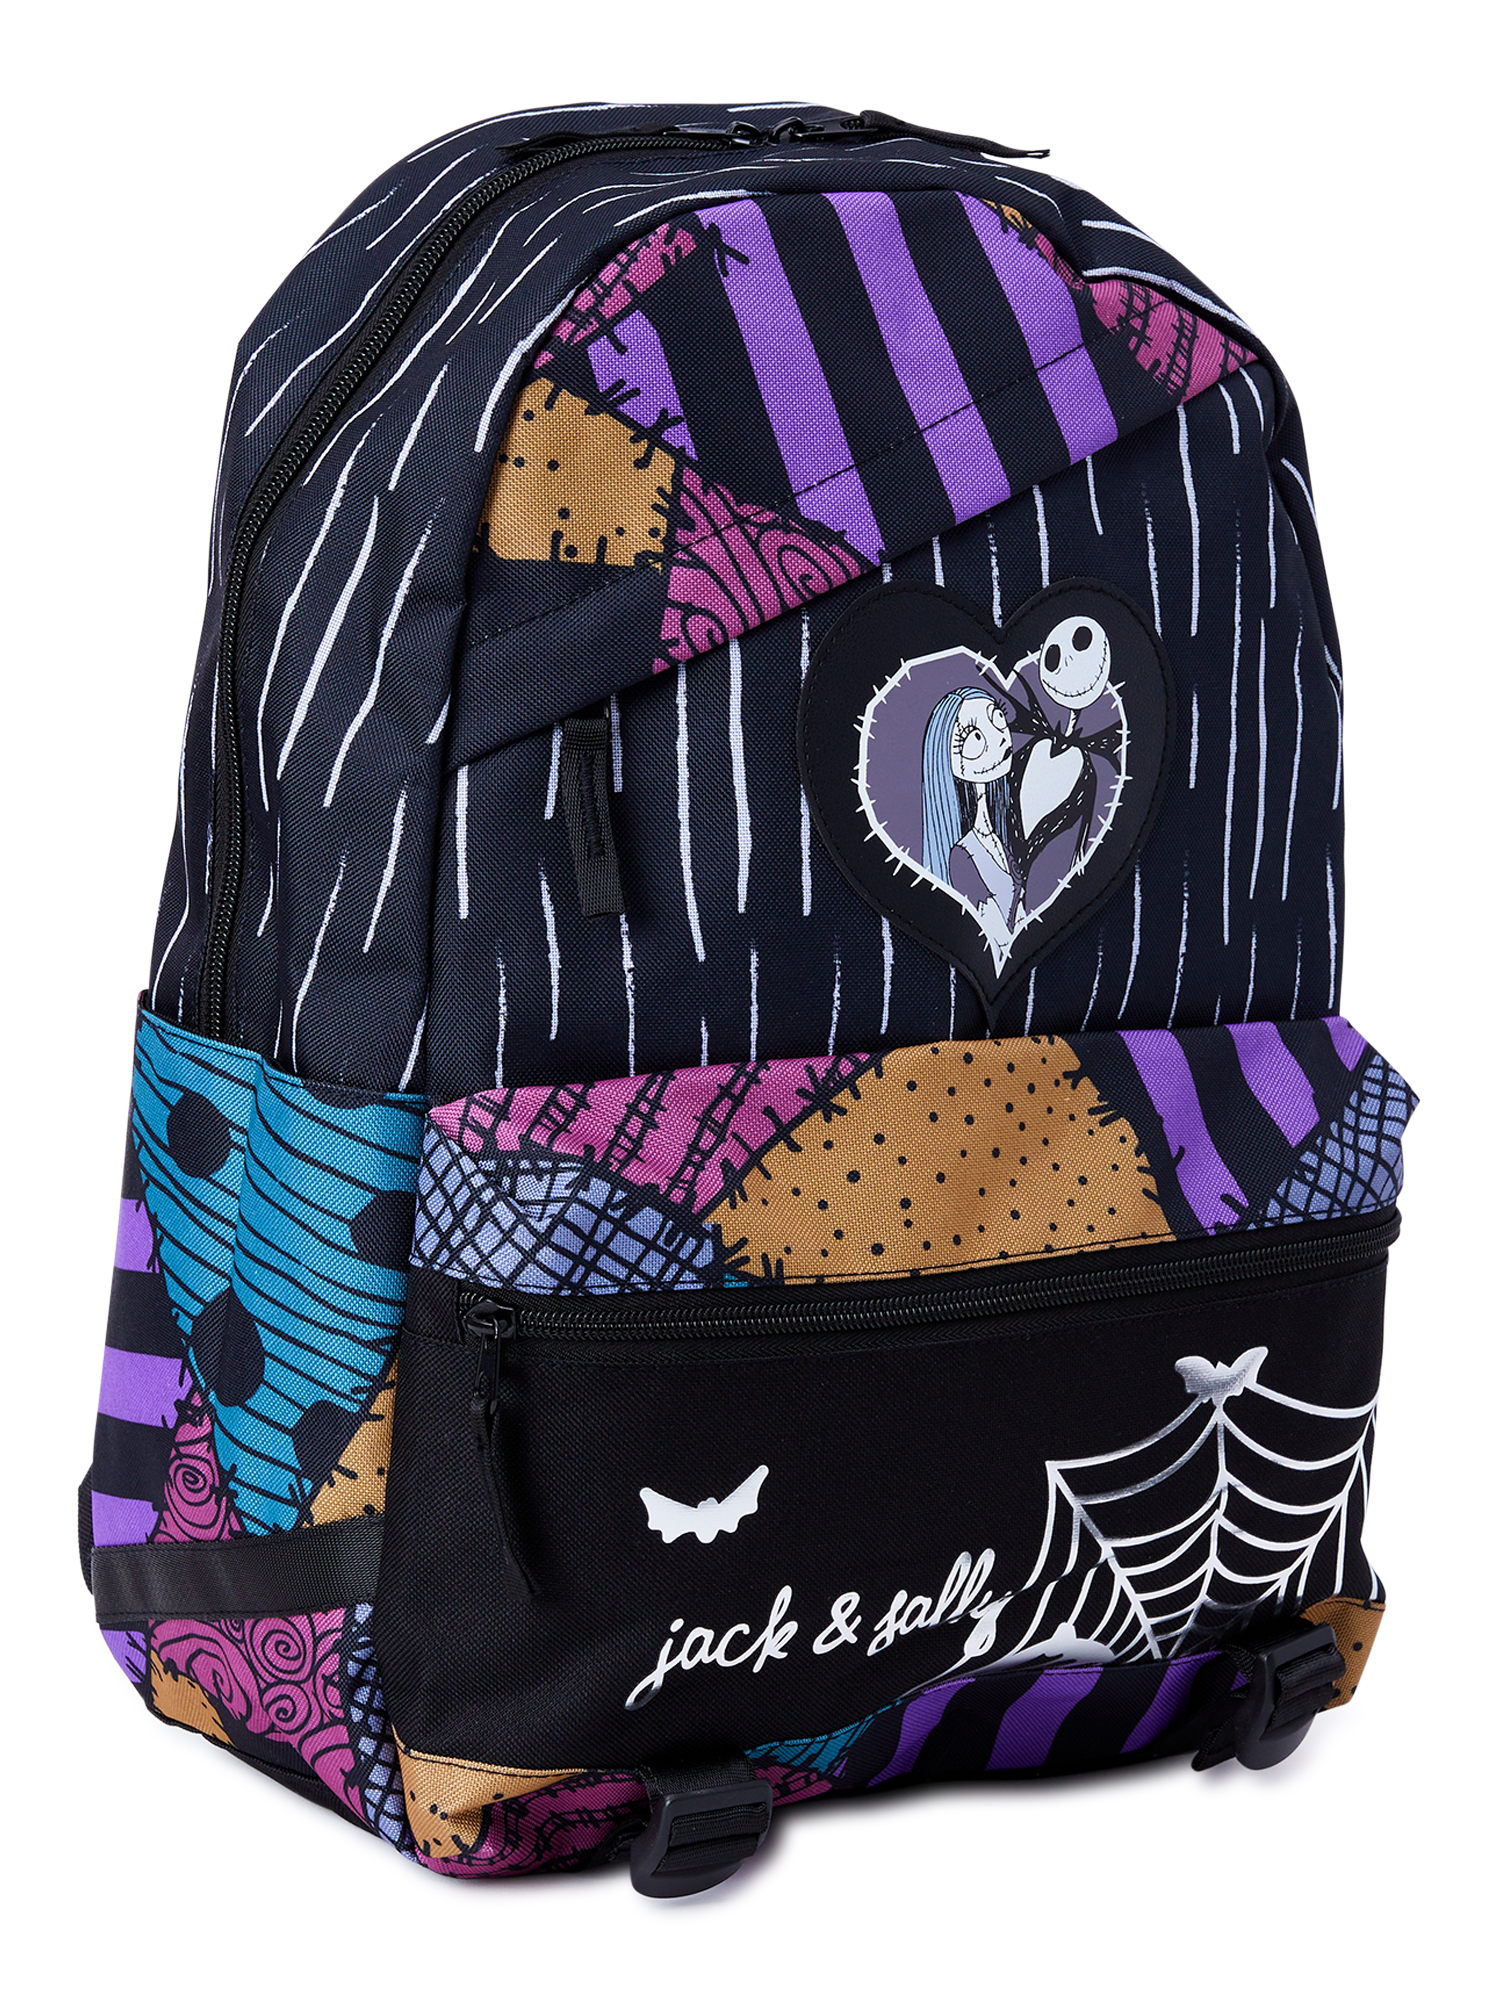 Disney The Nightmare Before Christmas Jack and Sally Unisex 18" Laptop Backpack, Black Multi-Color - image 2 of 5